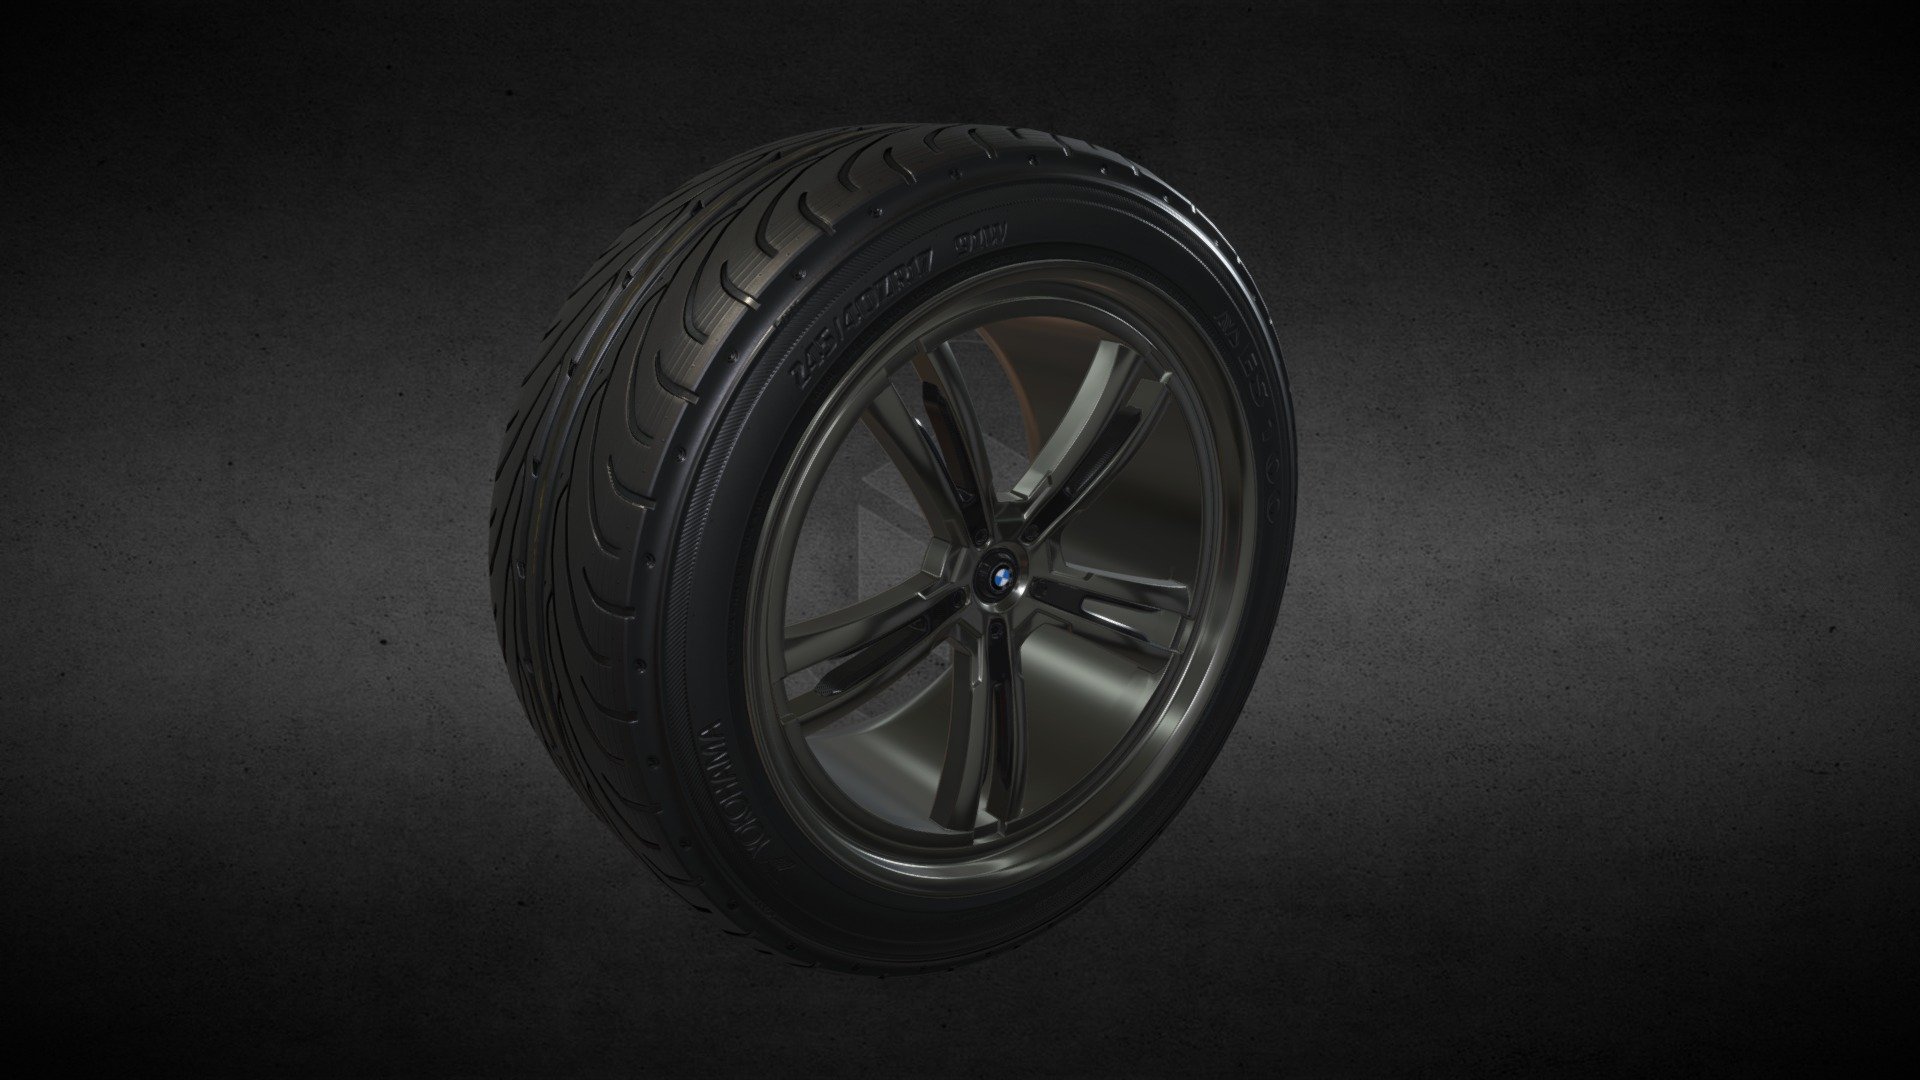 Free tire model. 

Game rady fully texturized low/mid poly tire and rim model.

If you liked this model, check some of my other desighs 3d model